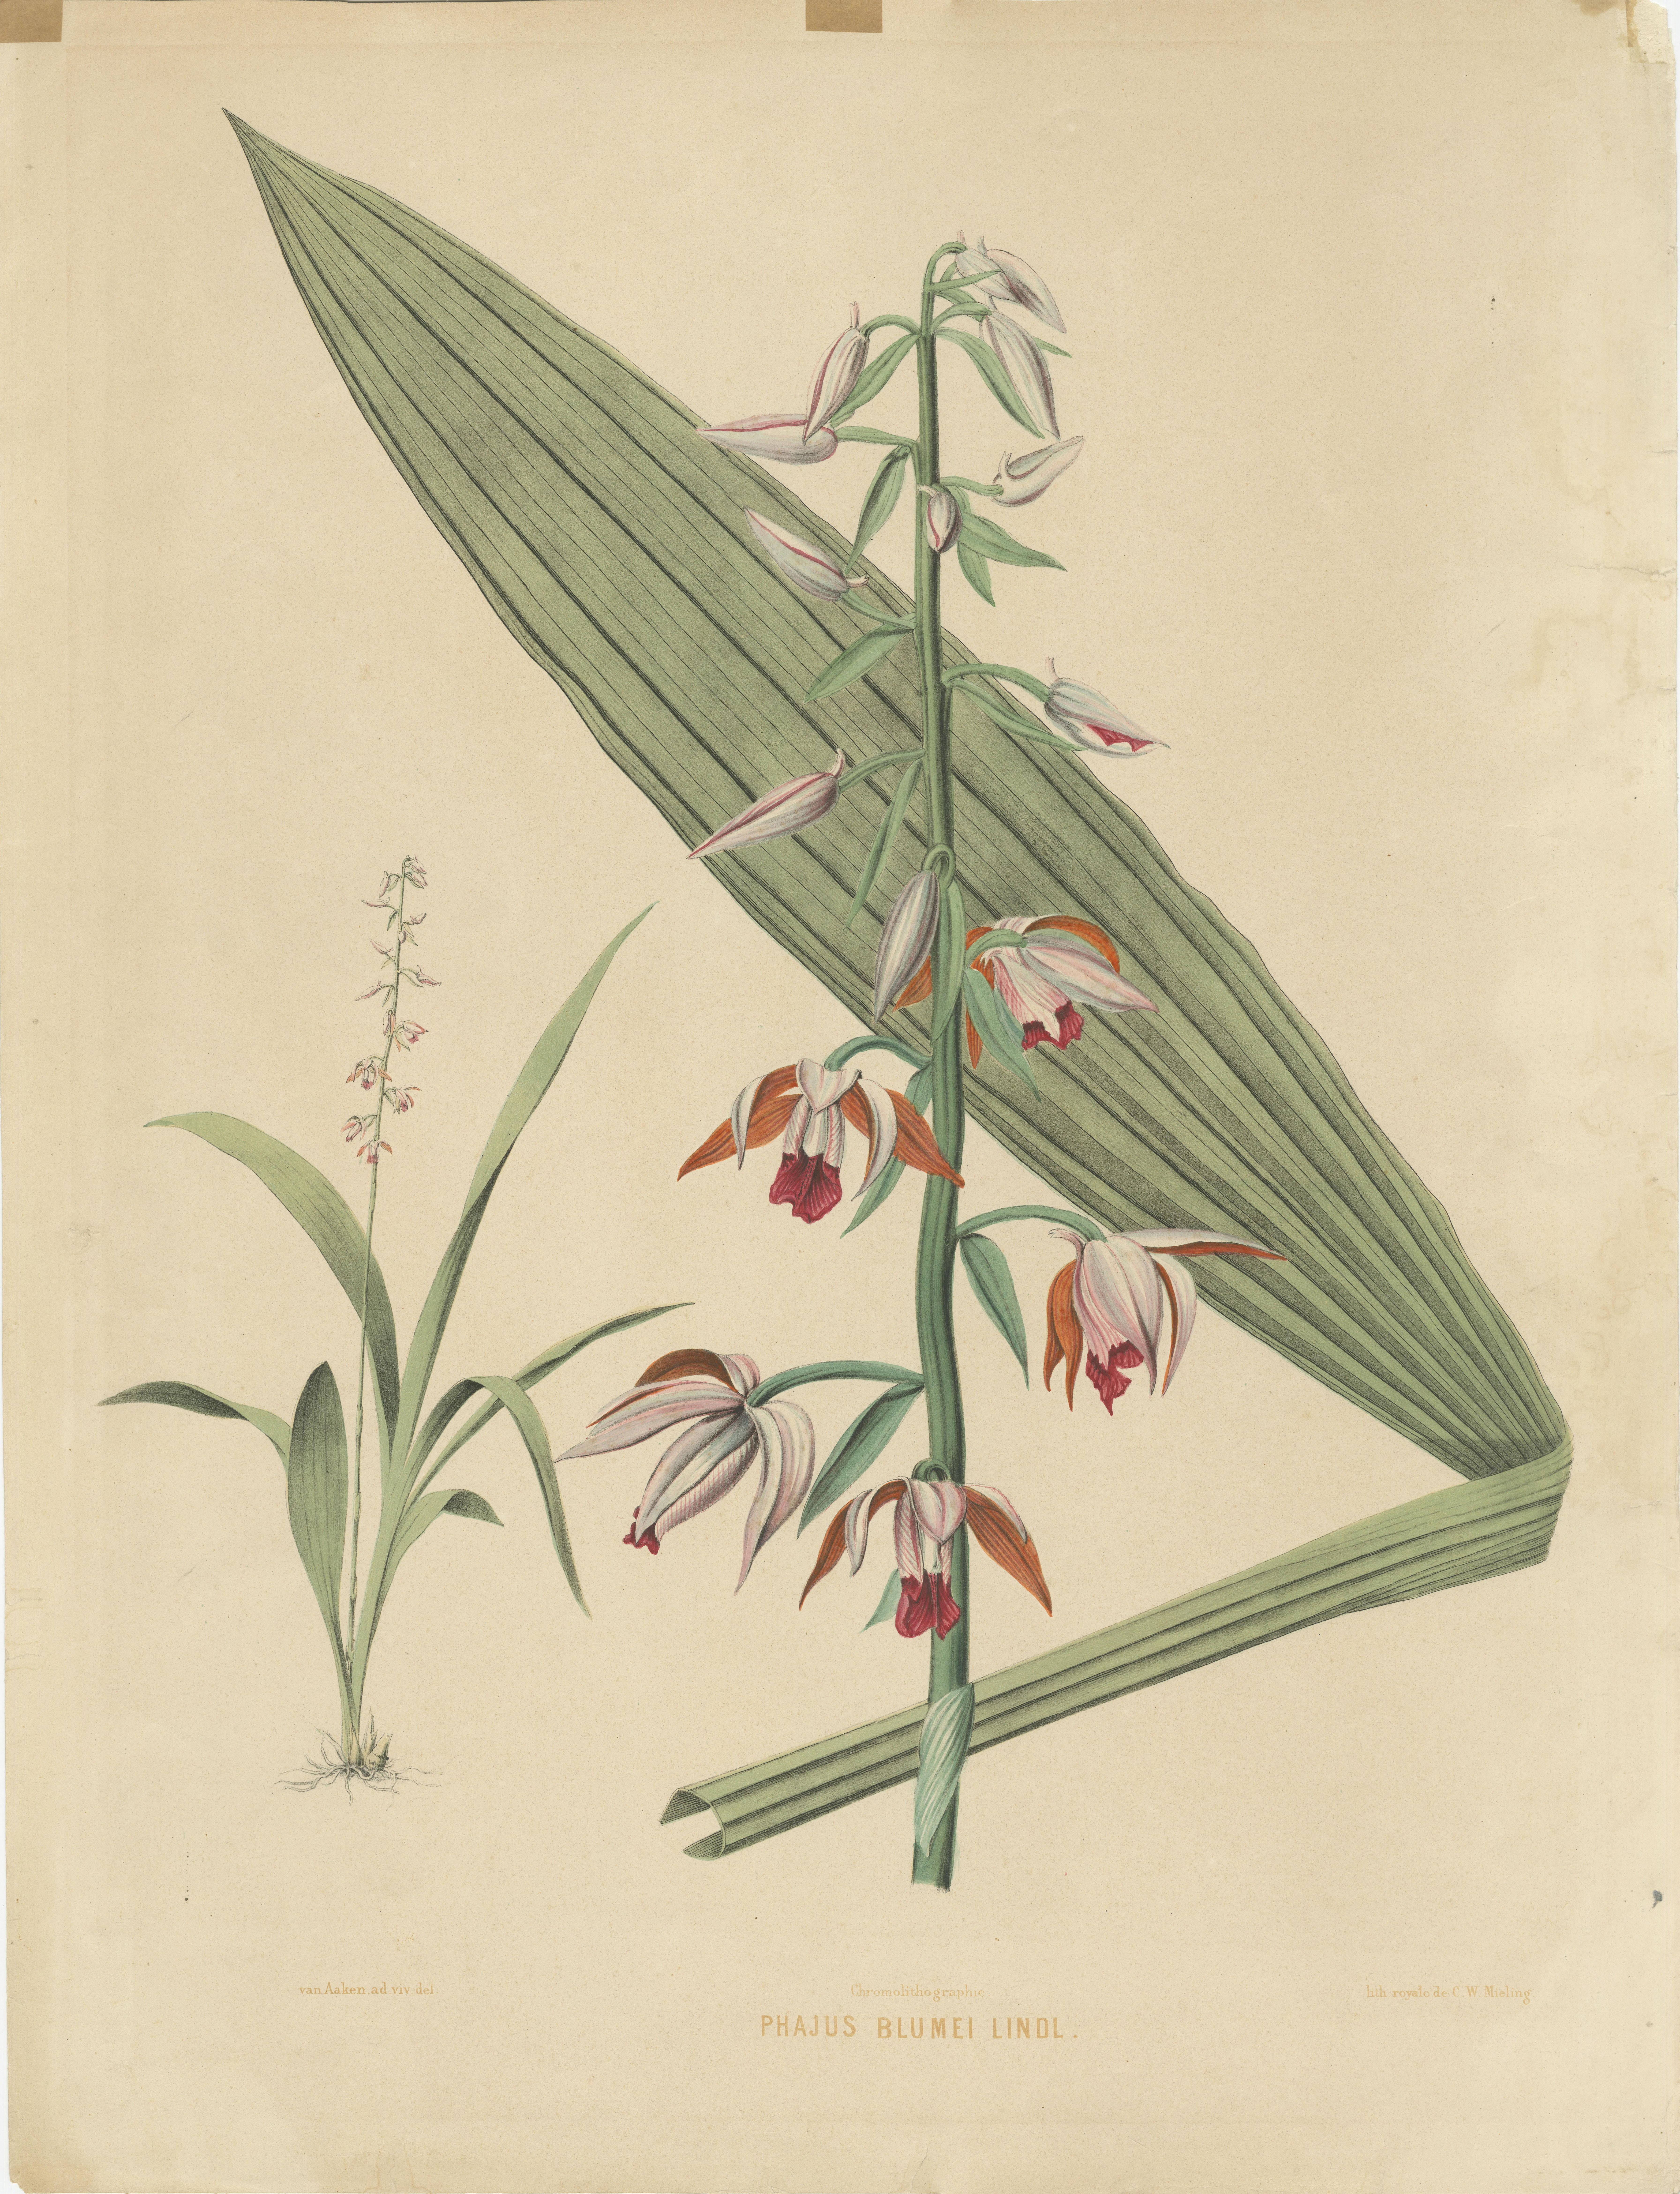 A large chromolithograph botanical illustration, featuring the orchid species Phaius blumei Lindl. The print comes from the 19th-century work 